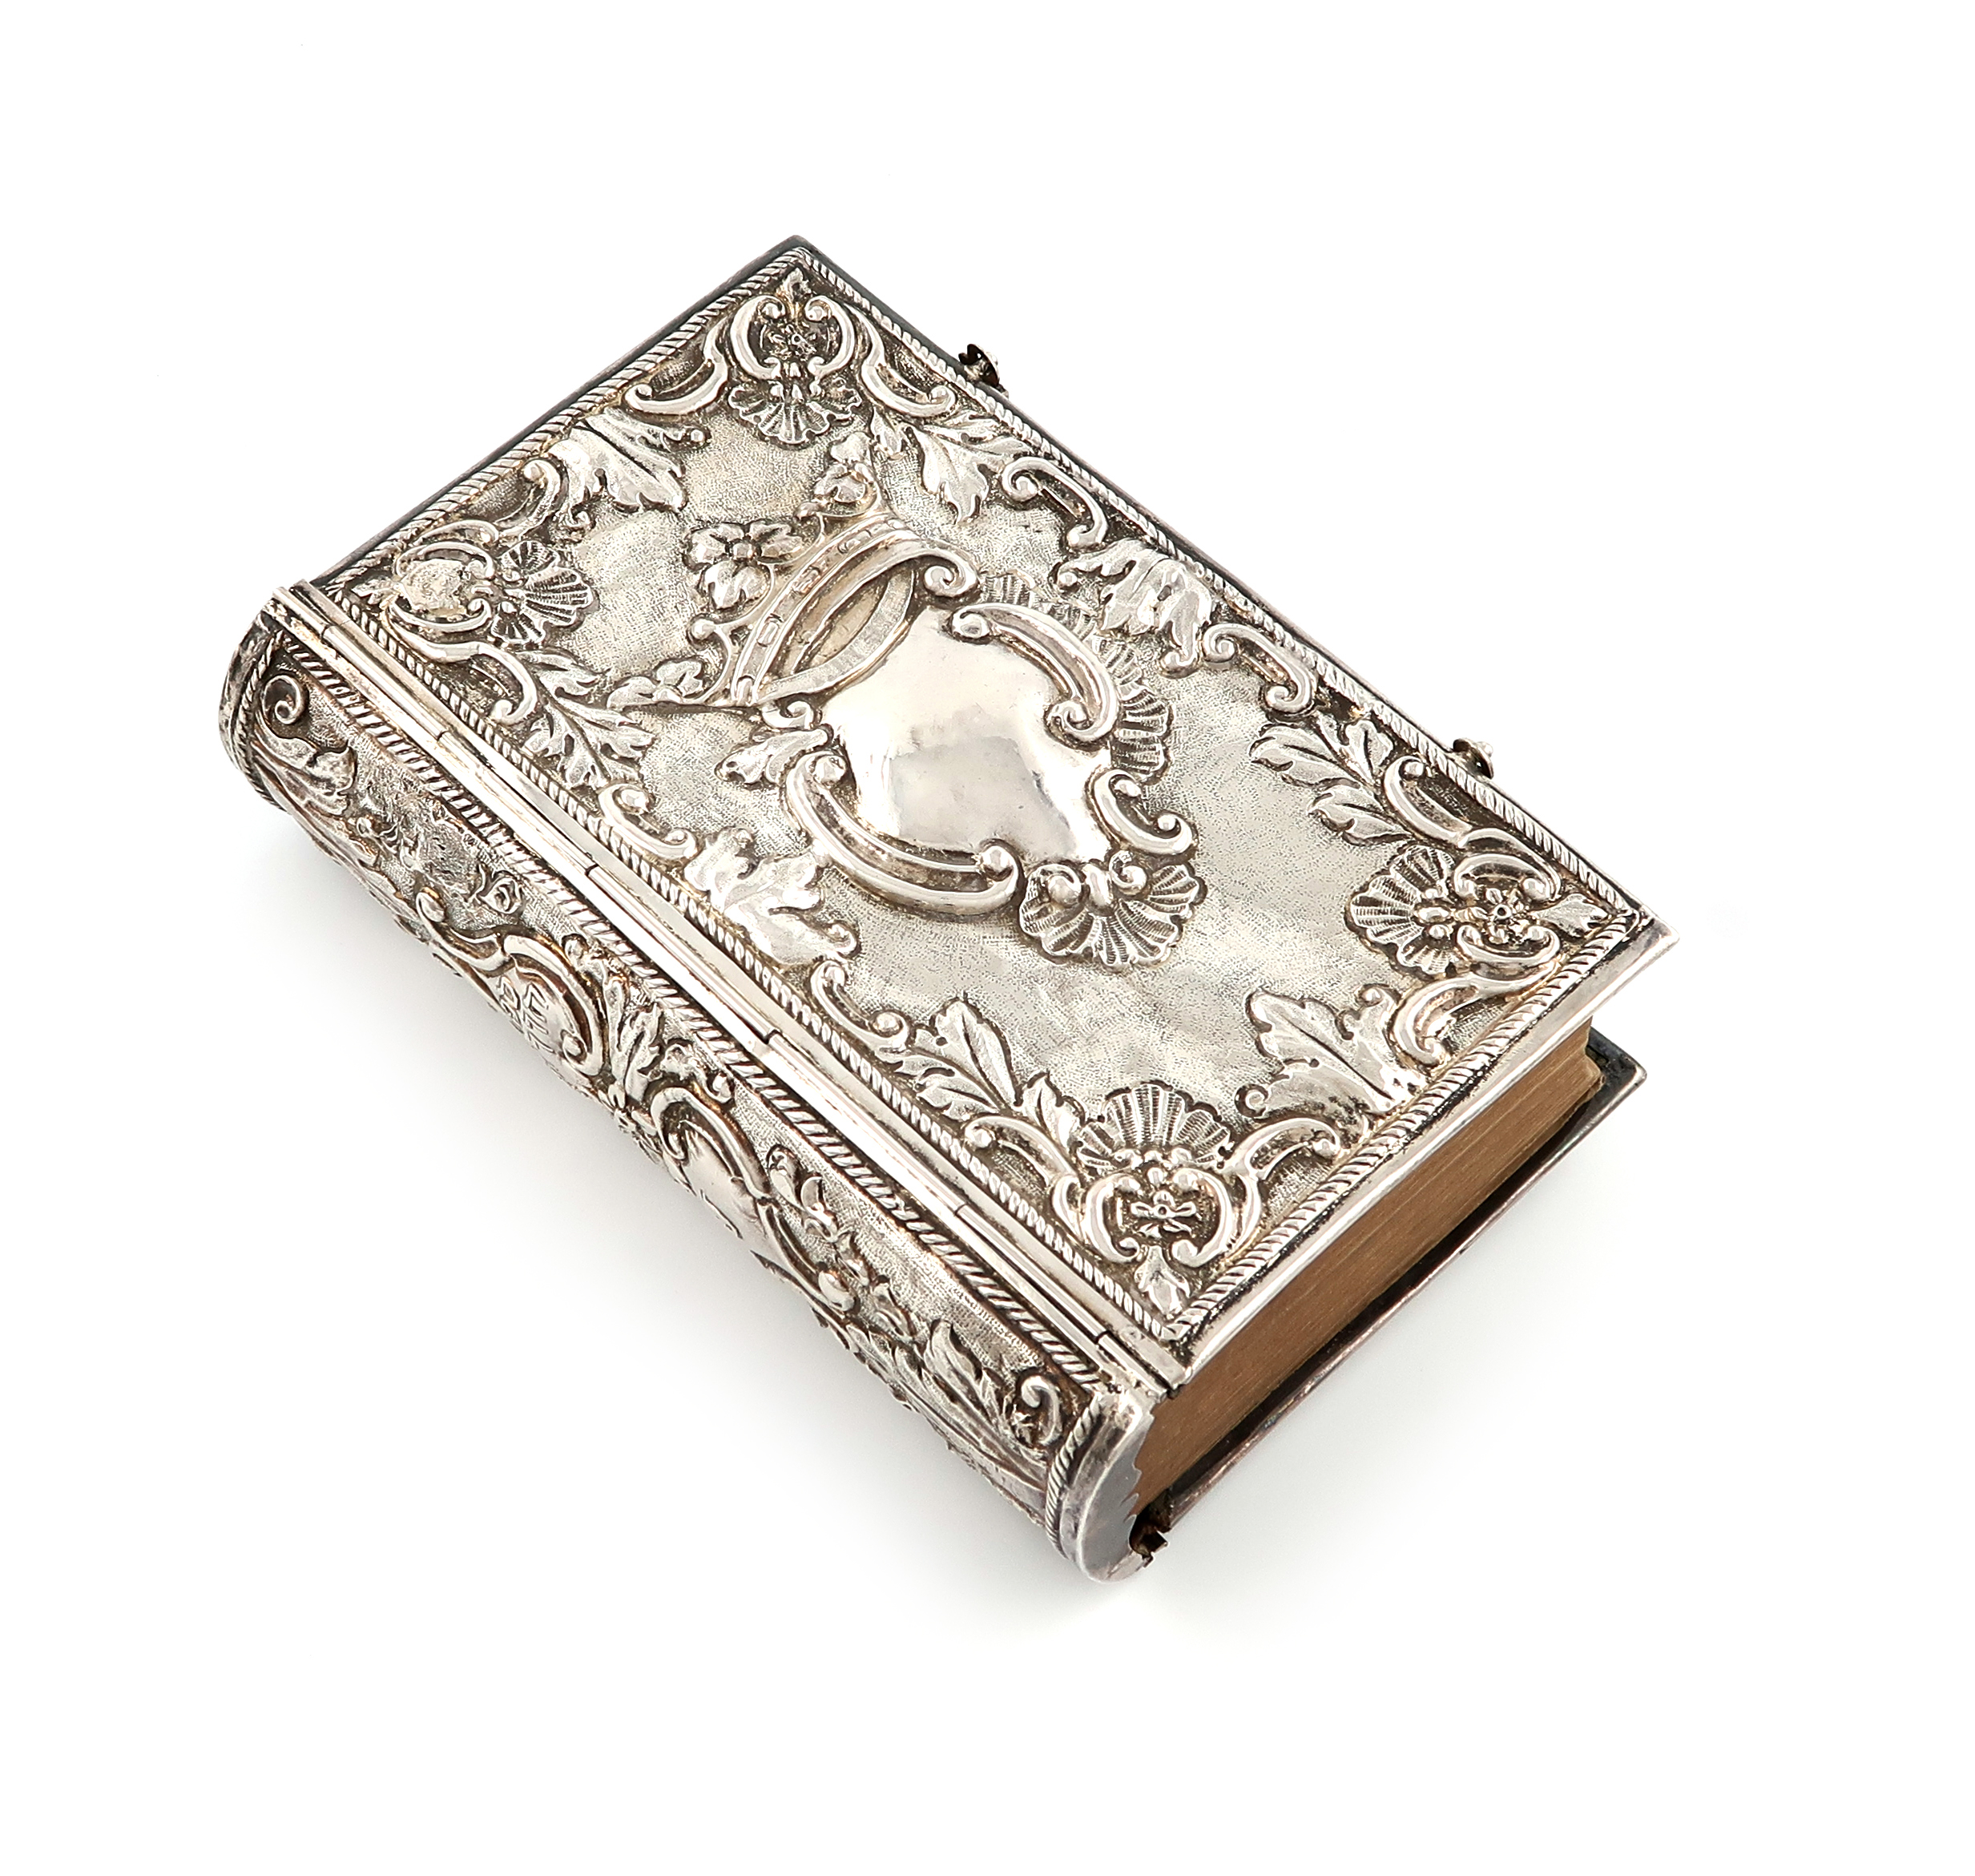 Jewish Ritual Objects Attract Strong Bidding at Silver Sale | Woolley ...